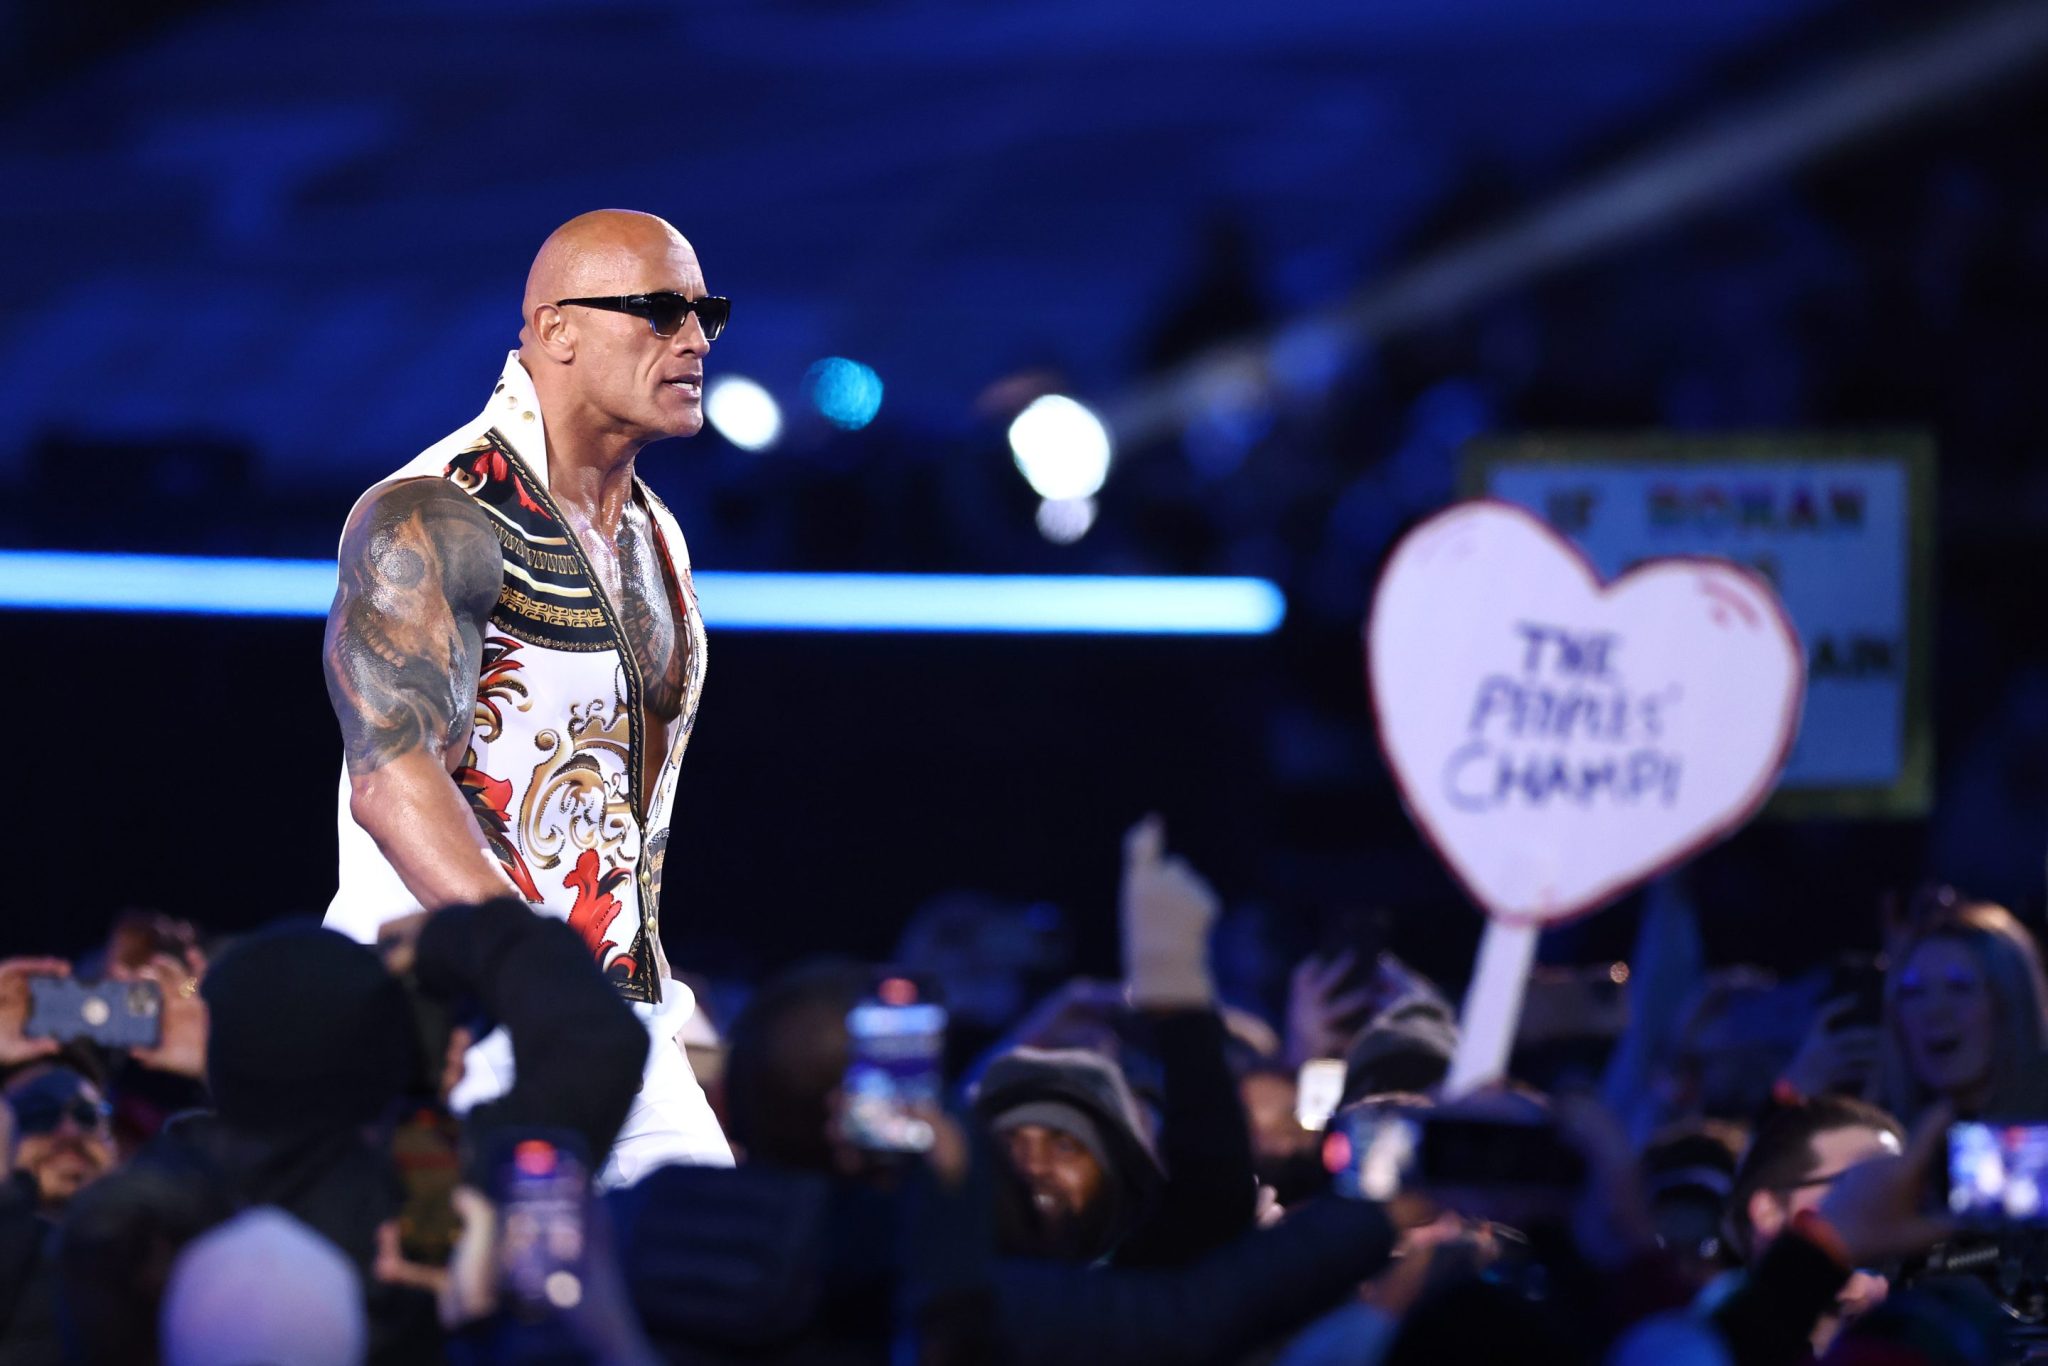 Dwayne Johnson earns $9 million payday from WWE